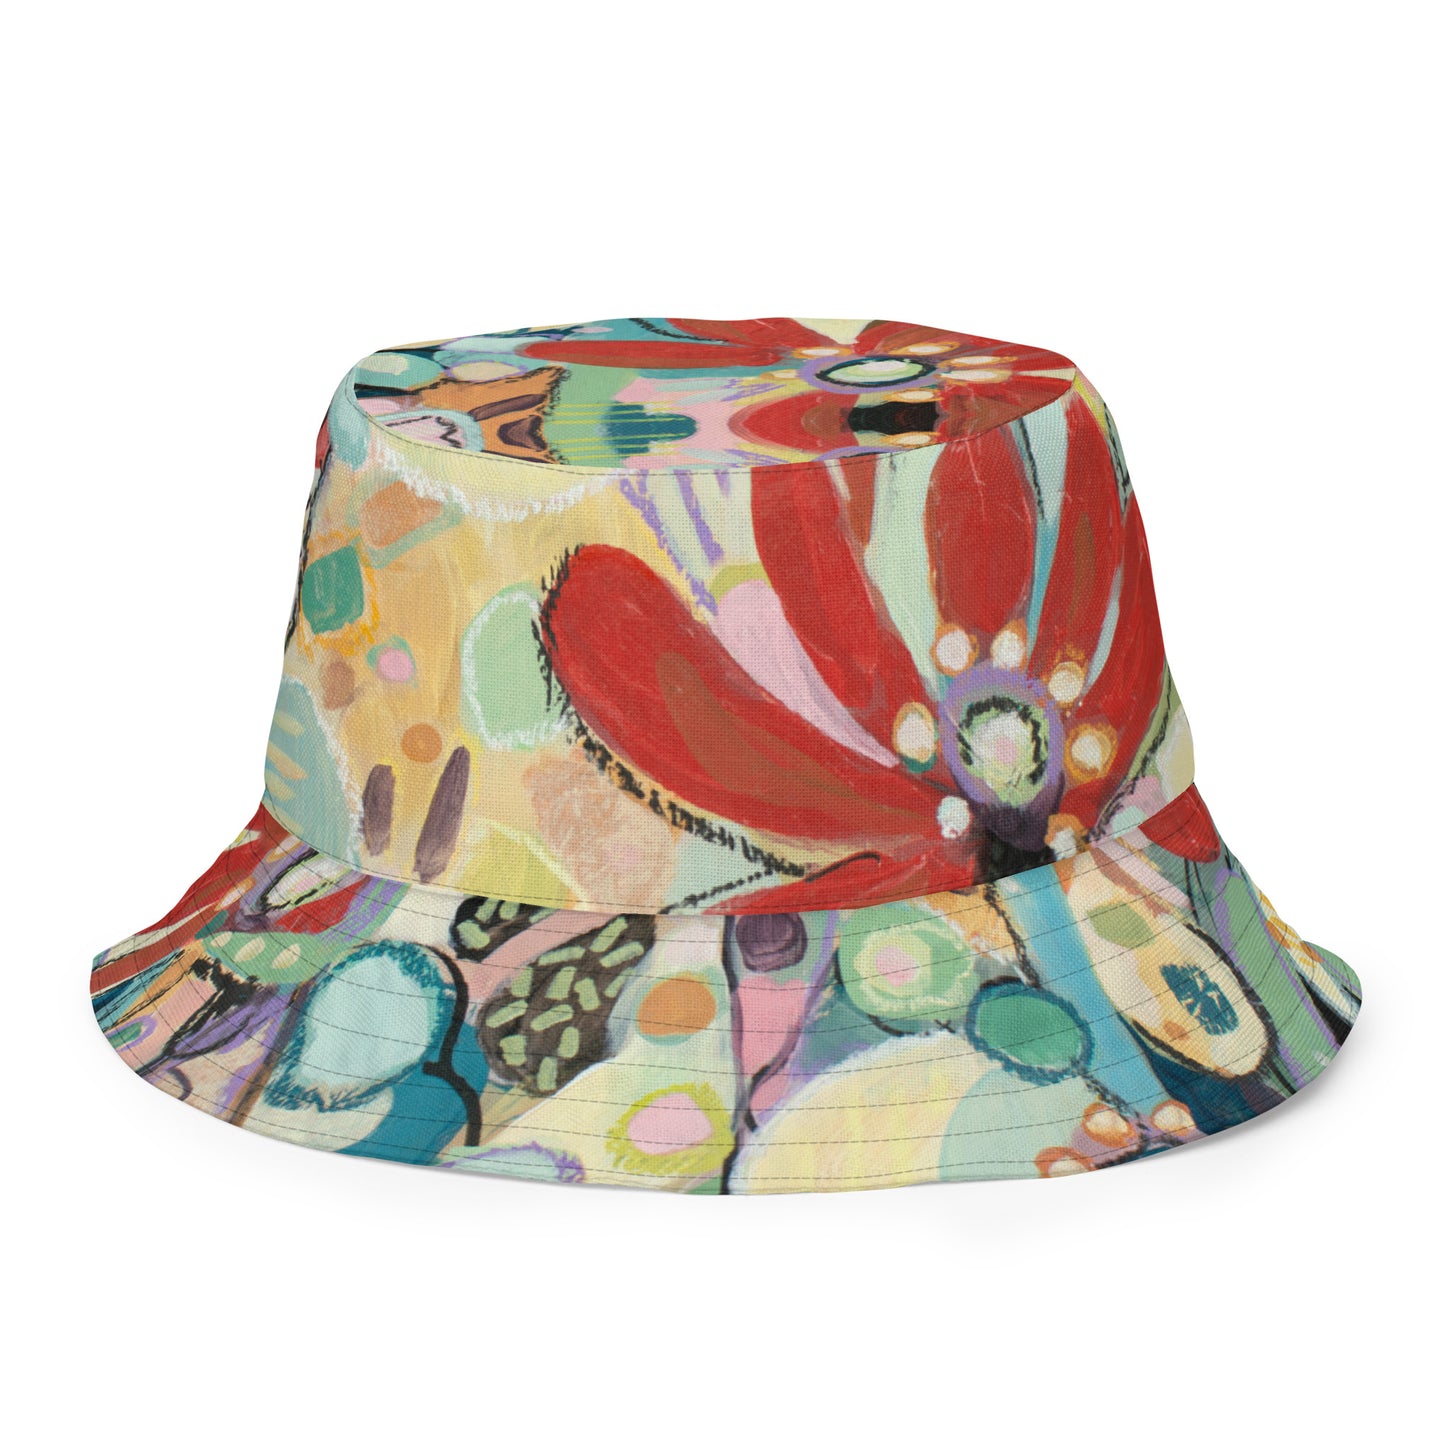 Reckless Succulent / Asking for Flowers  Reversible bucket hat